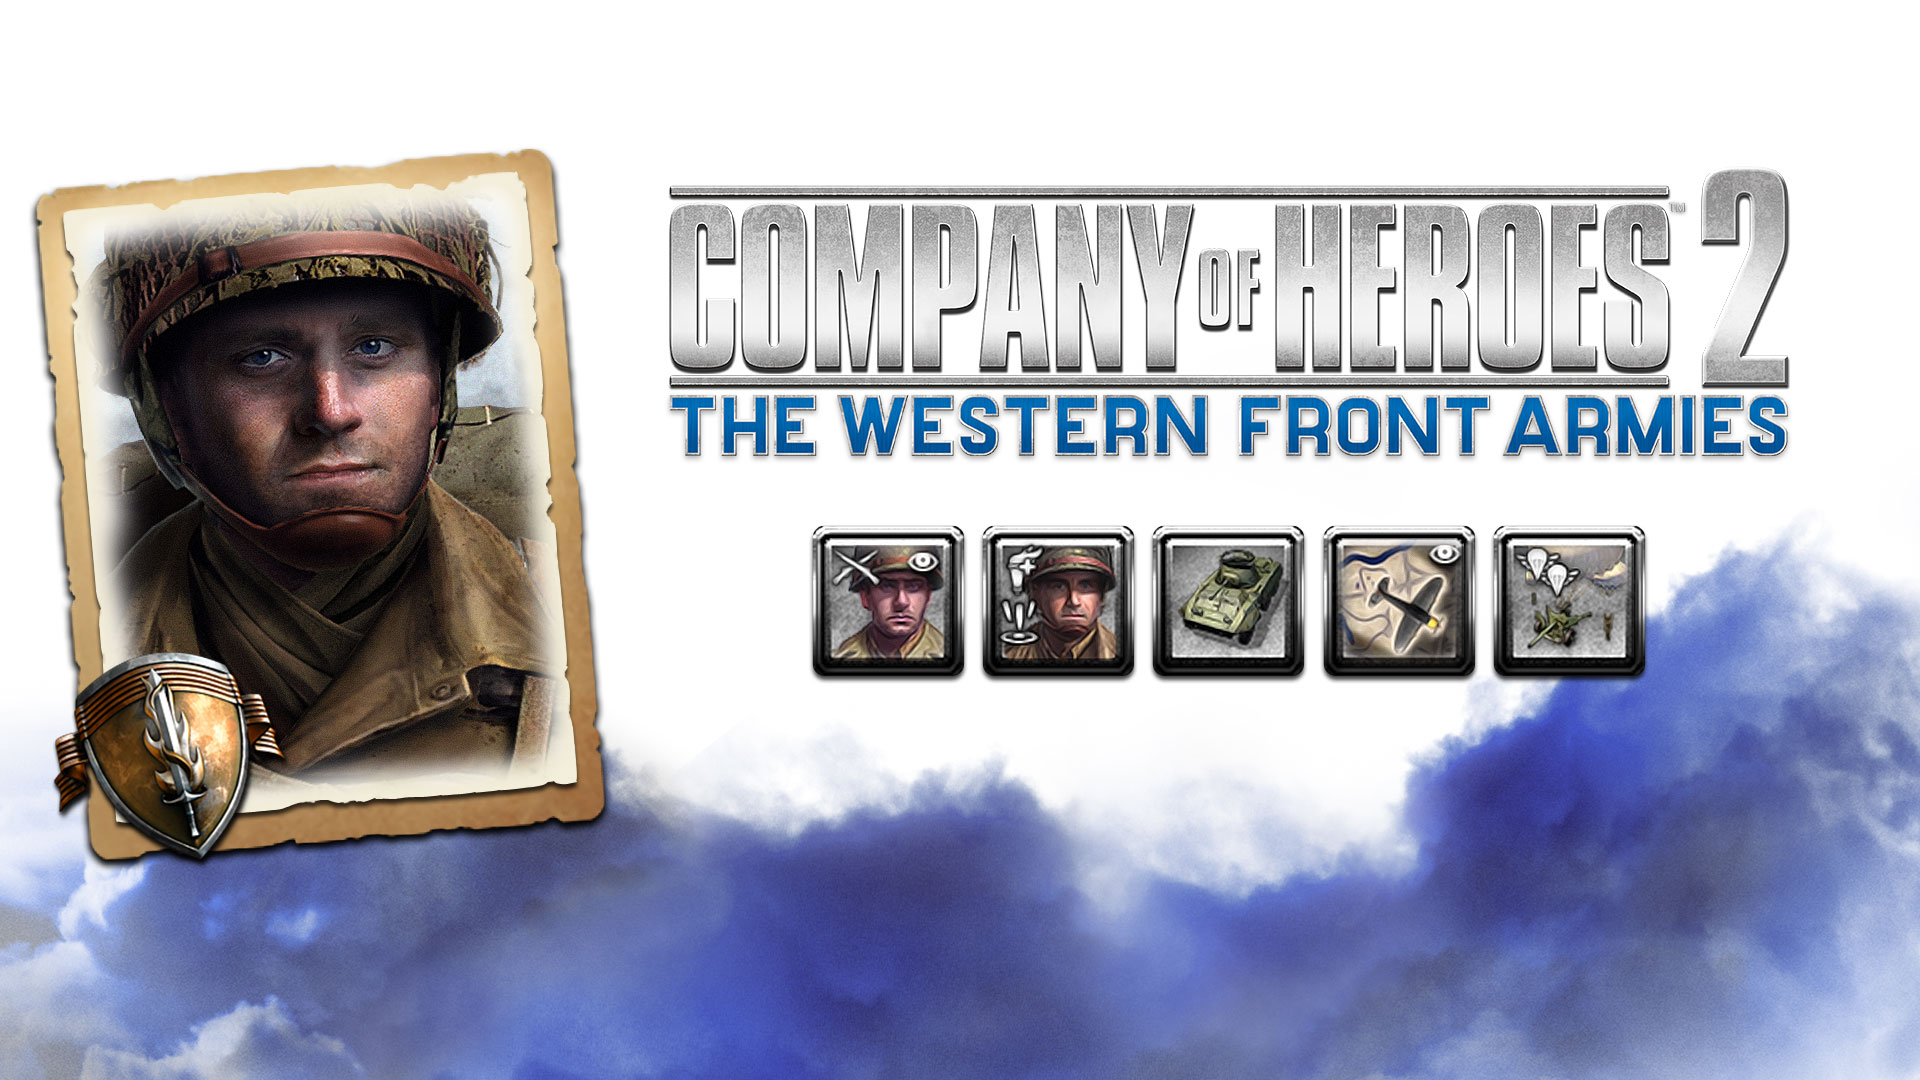 Company of Heroes 2 - US Forces Commander: Recon Support Company DLC Steam CD Key 10.16 USD